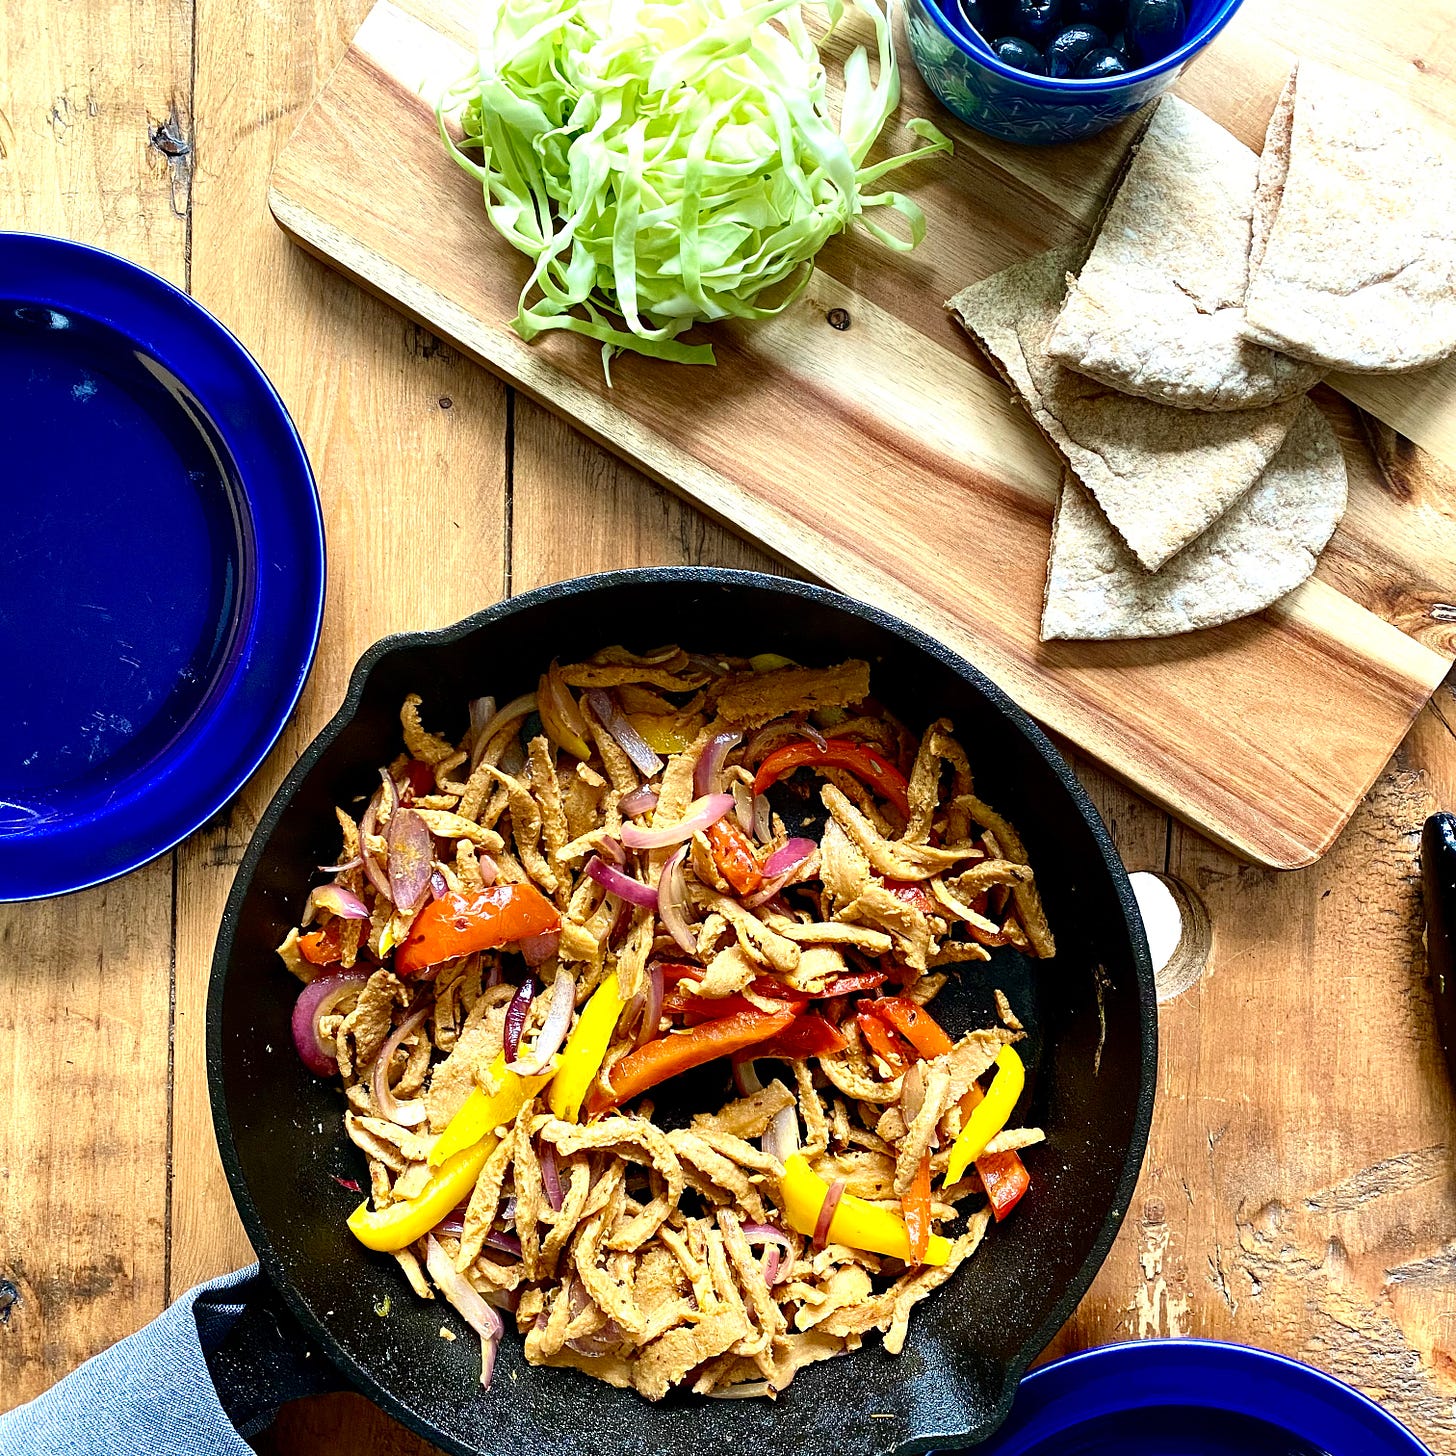 Skillet with plant-based kebab, peppers, onions, served with pitta bread and shredded cabbage